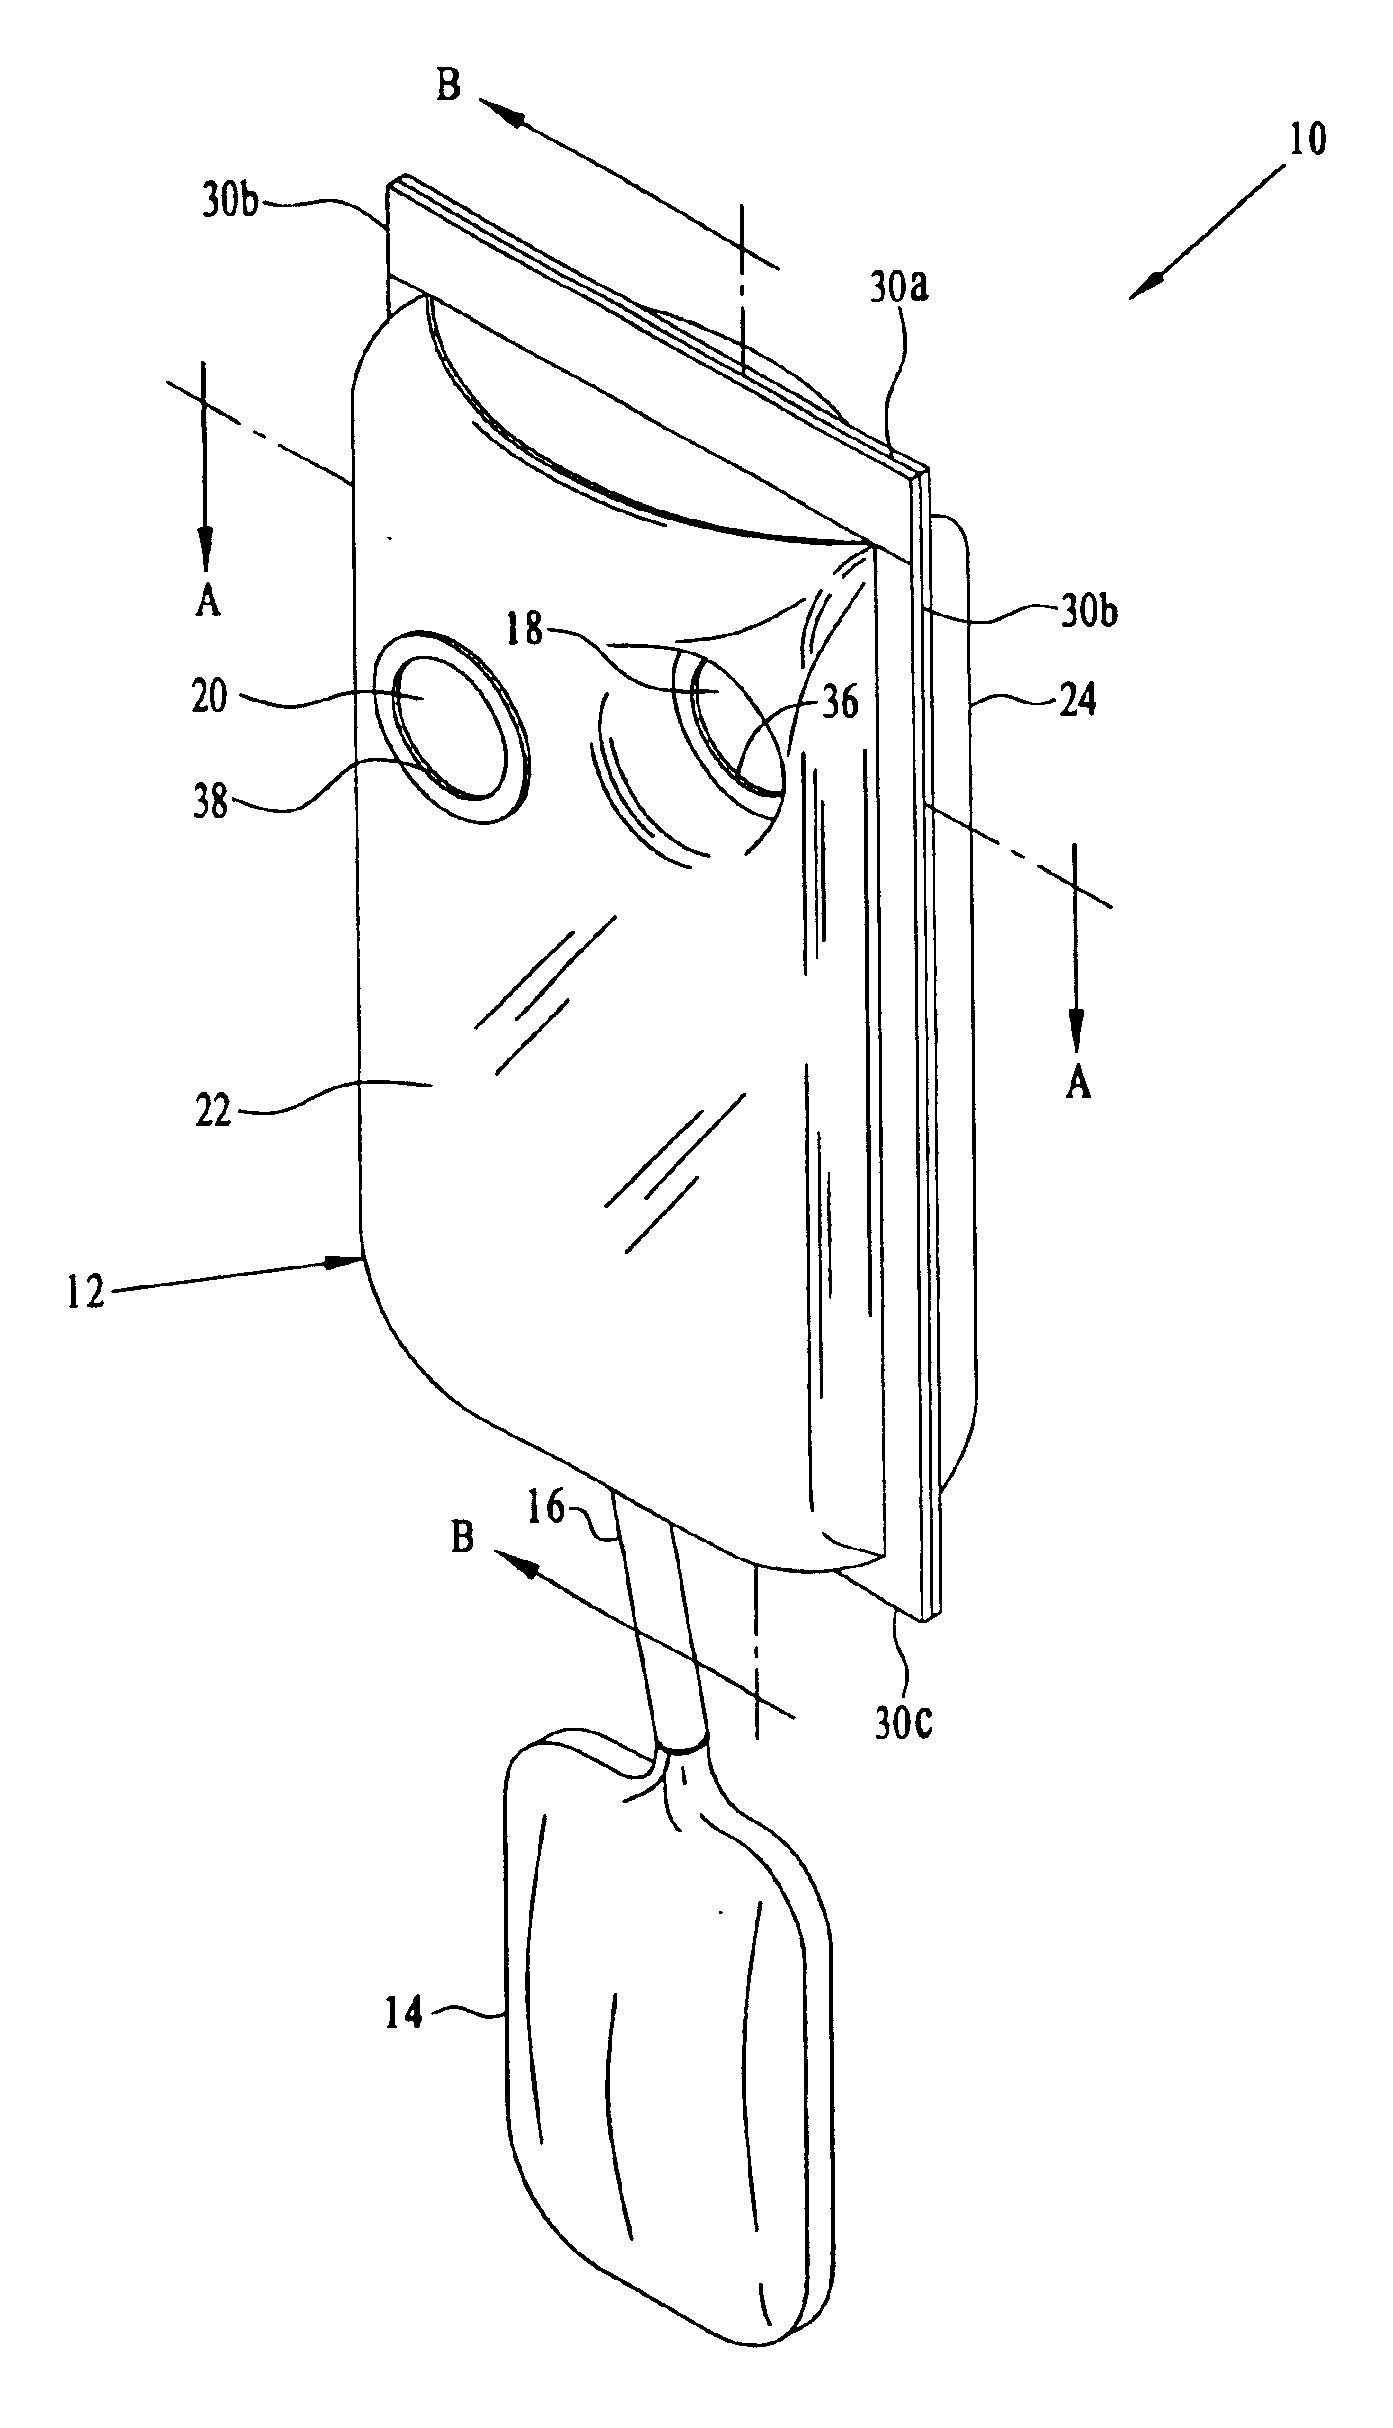 Apparatus to adapt a convective treatment system or device for cooling